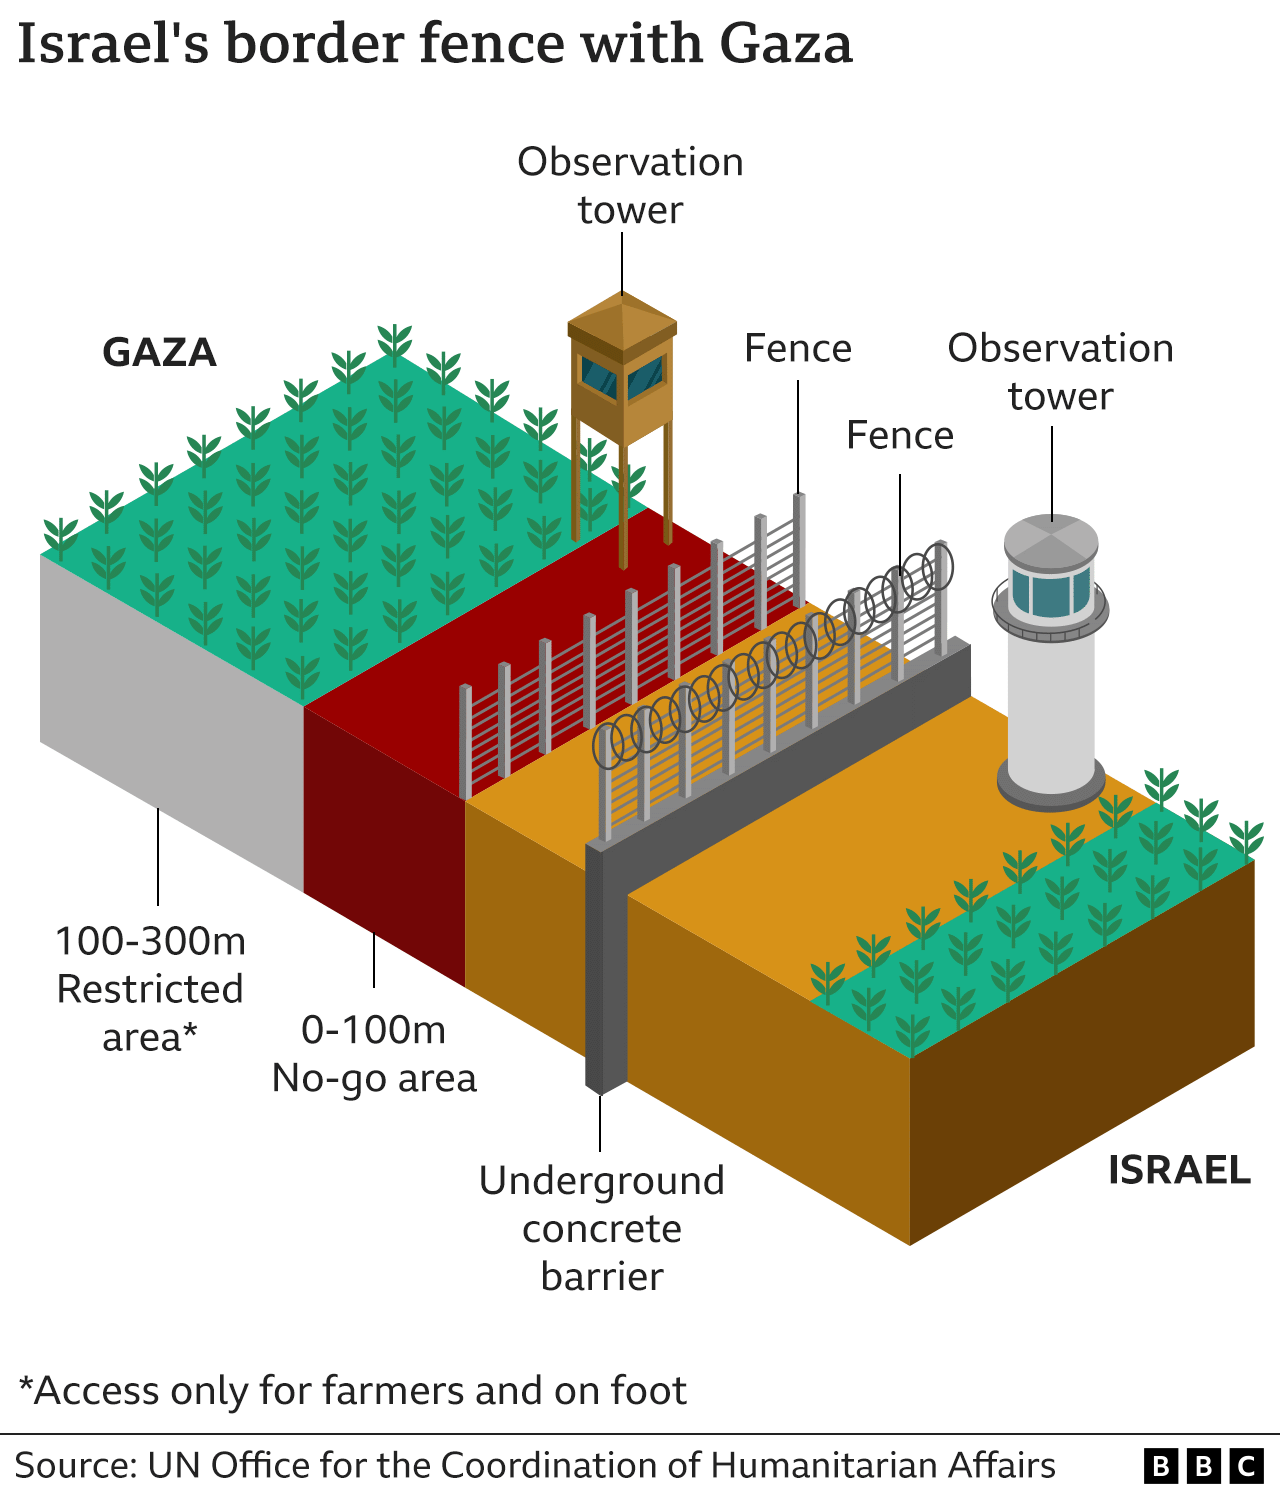 Graphic showing Israel's border fence with Gaza, highlighting the observation towers on either side of a double fence, with a no-go area from 0 to 100m on the Gaza side, and a restricted zone from 100-300m. There is also an underground concrete wall under one of the fences